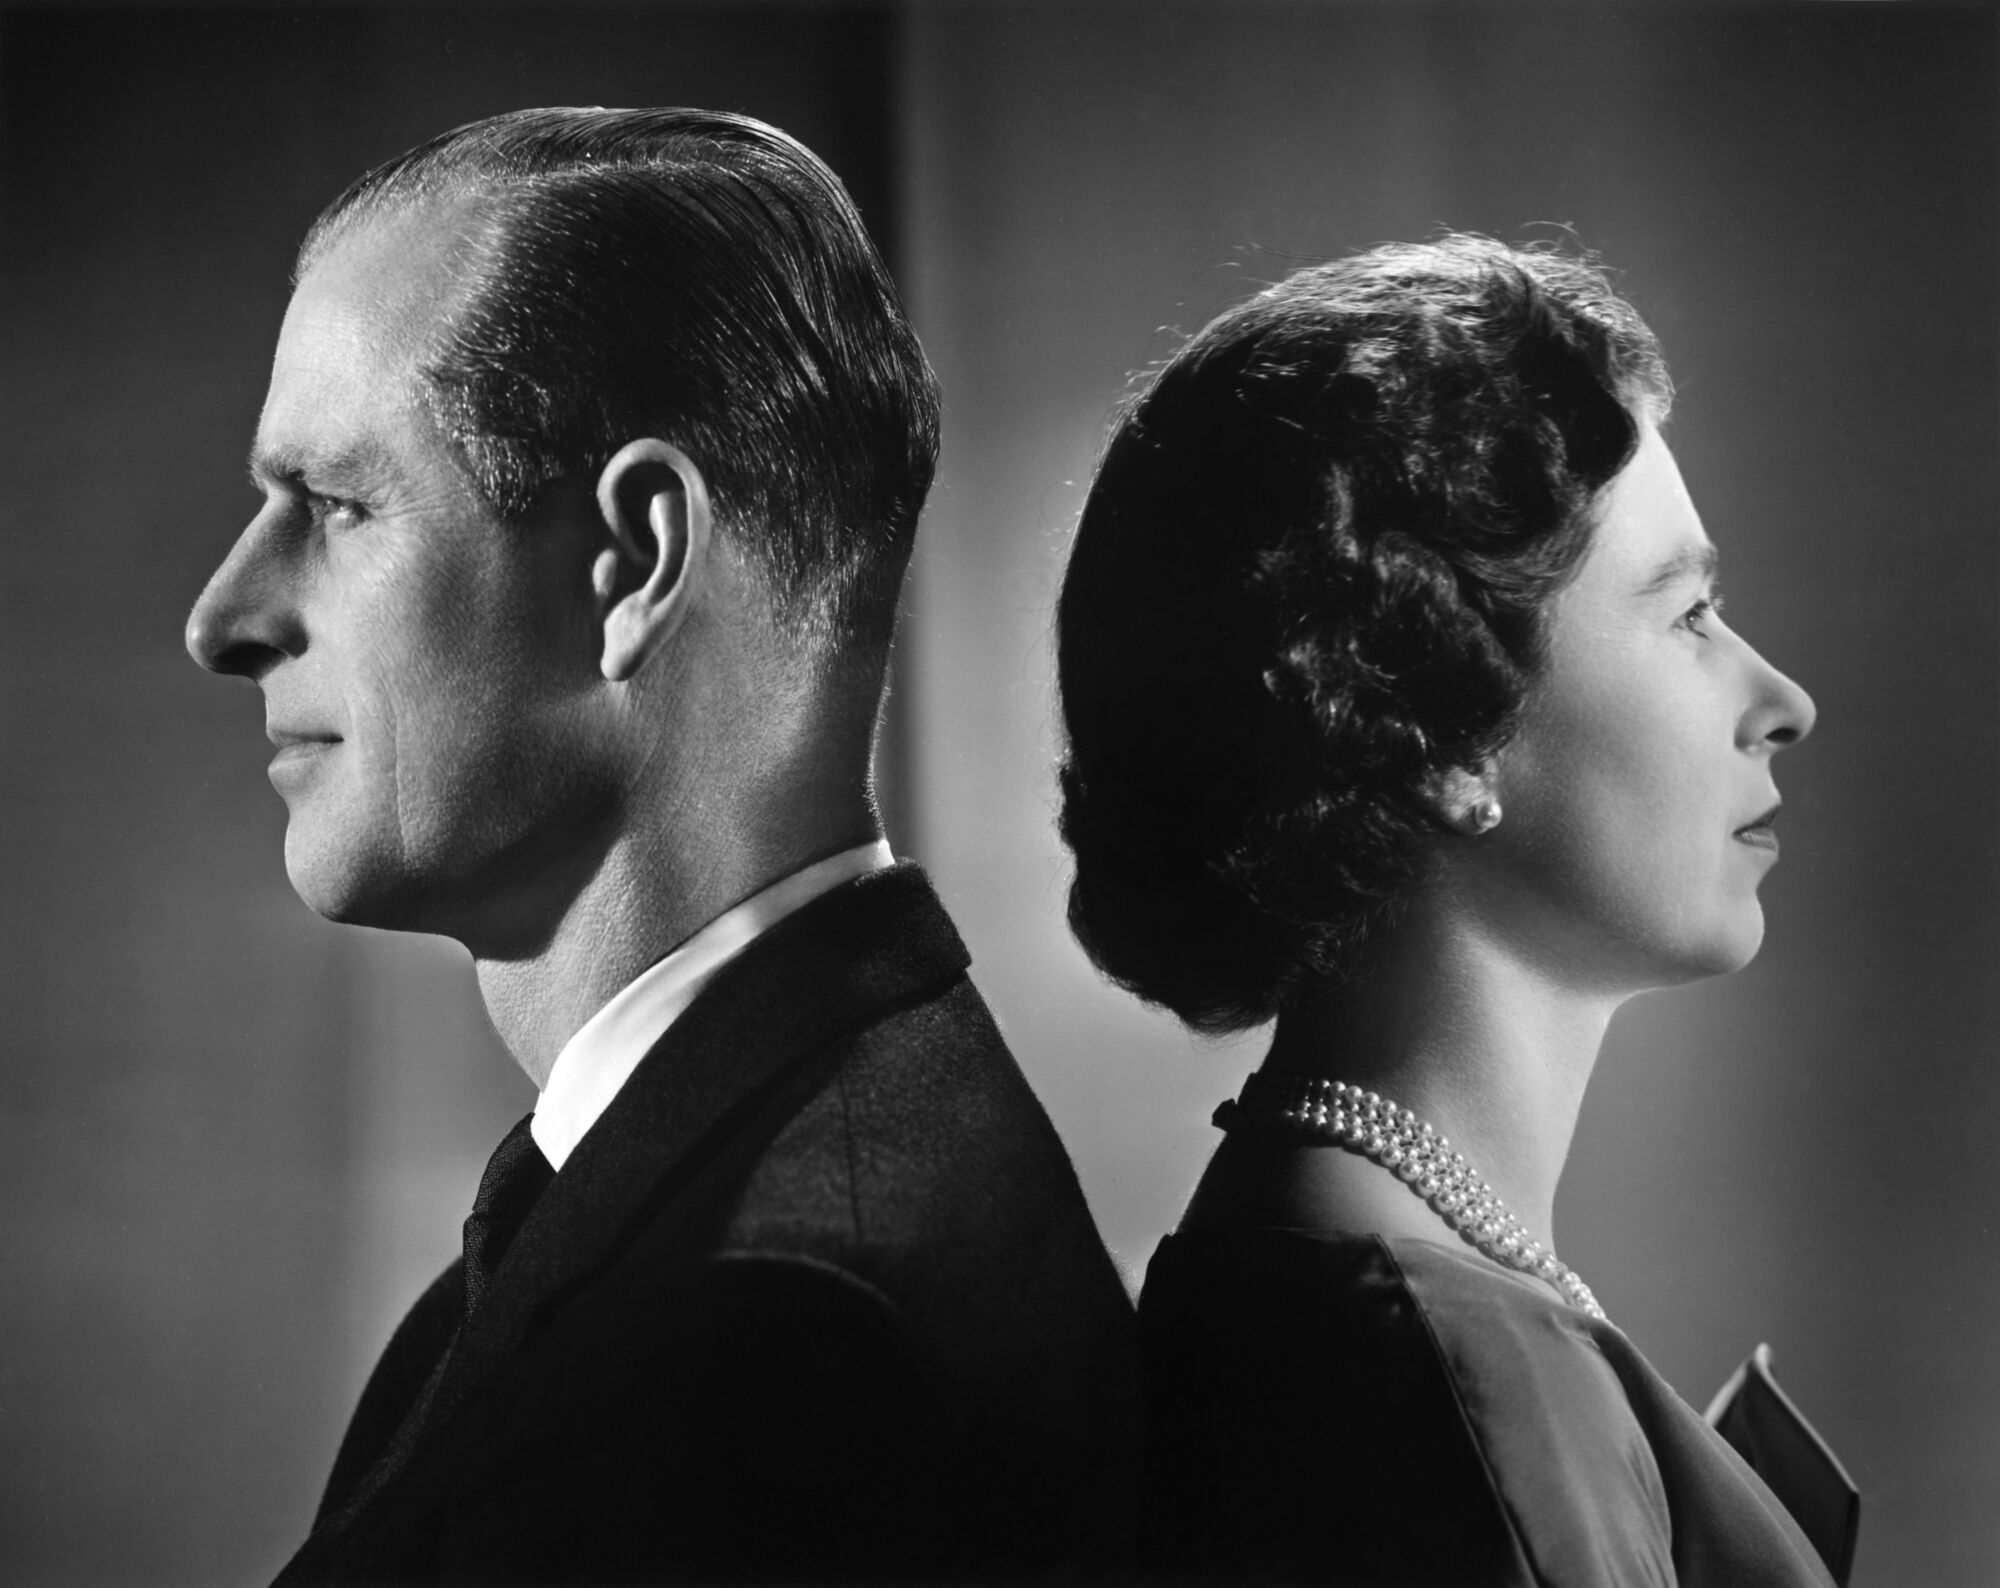 Queen Elizabeth II and Prince Philip pose for a portrait, December 1958.